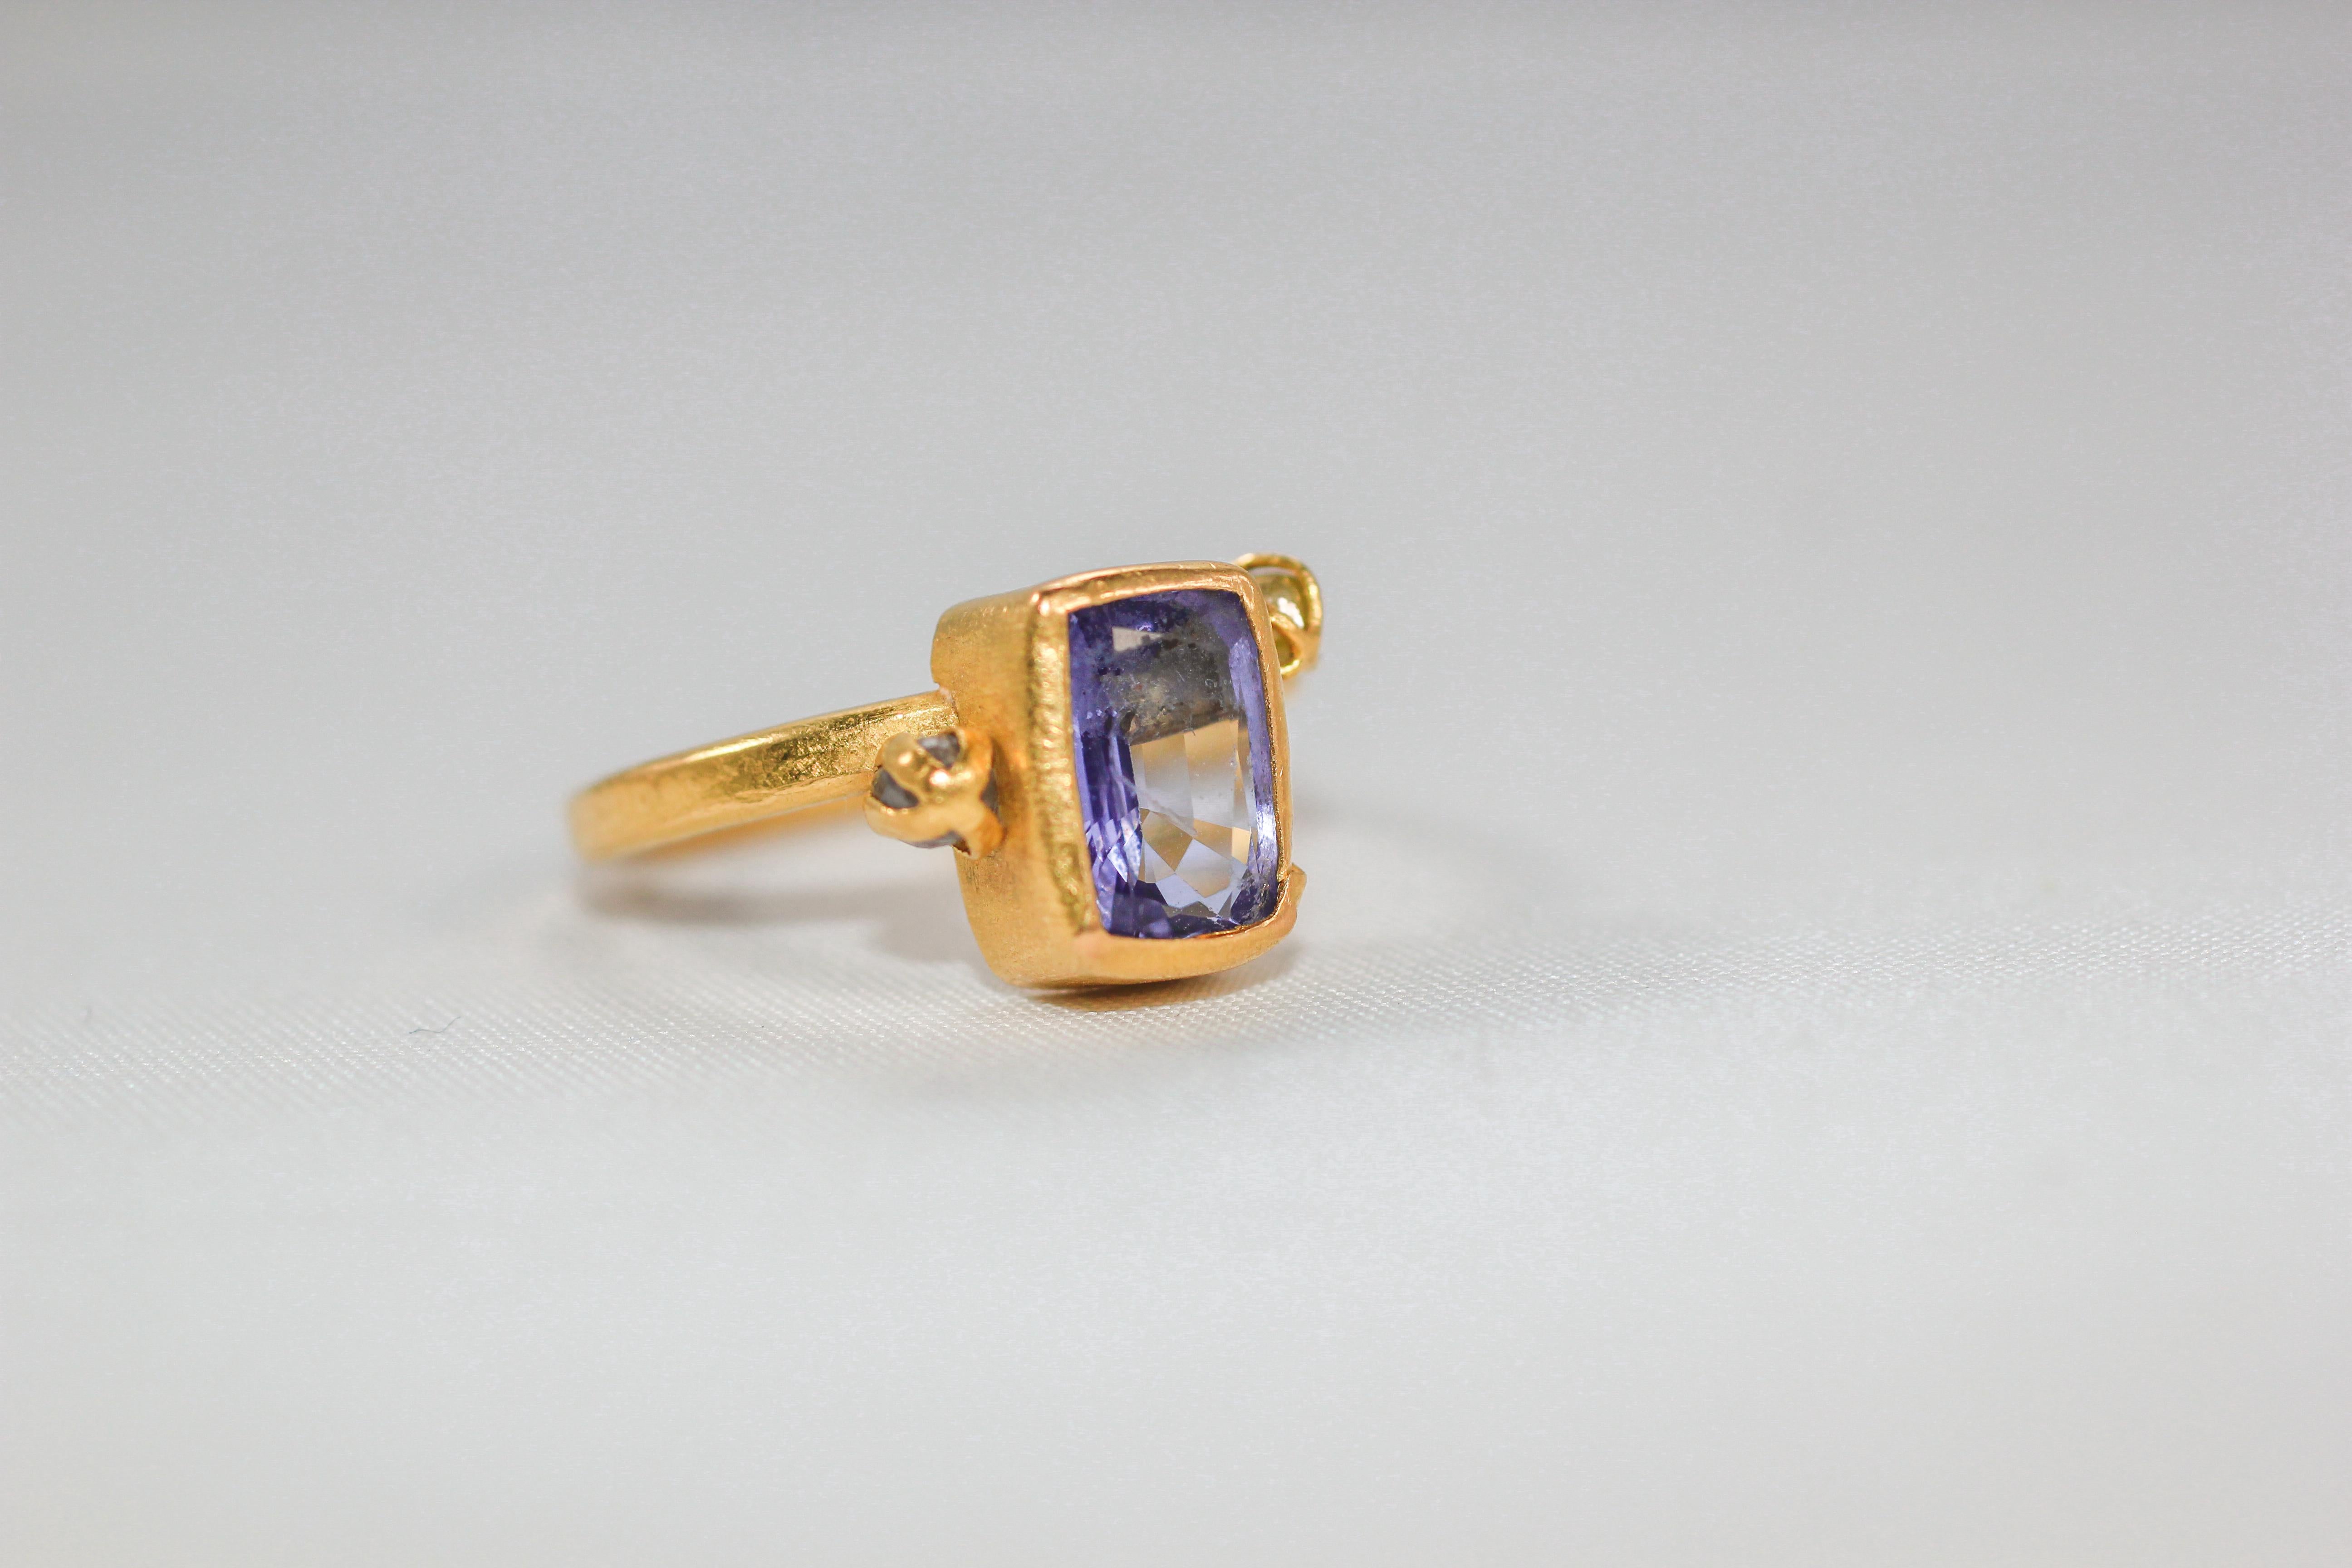 Pastel purple emerald cut Tanzanite is set in 22k solid gold bezel atop of a 21K gold shank. This three-stone fashion ring design is asymmetrical and features an unusual textured bezel and crisscross settings for the diamond briolettes. Popcorn ring